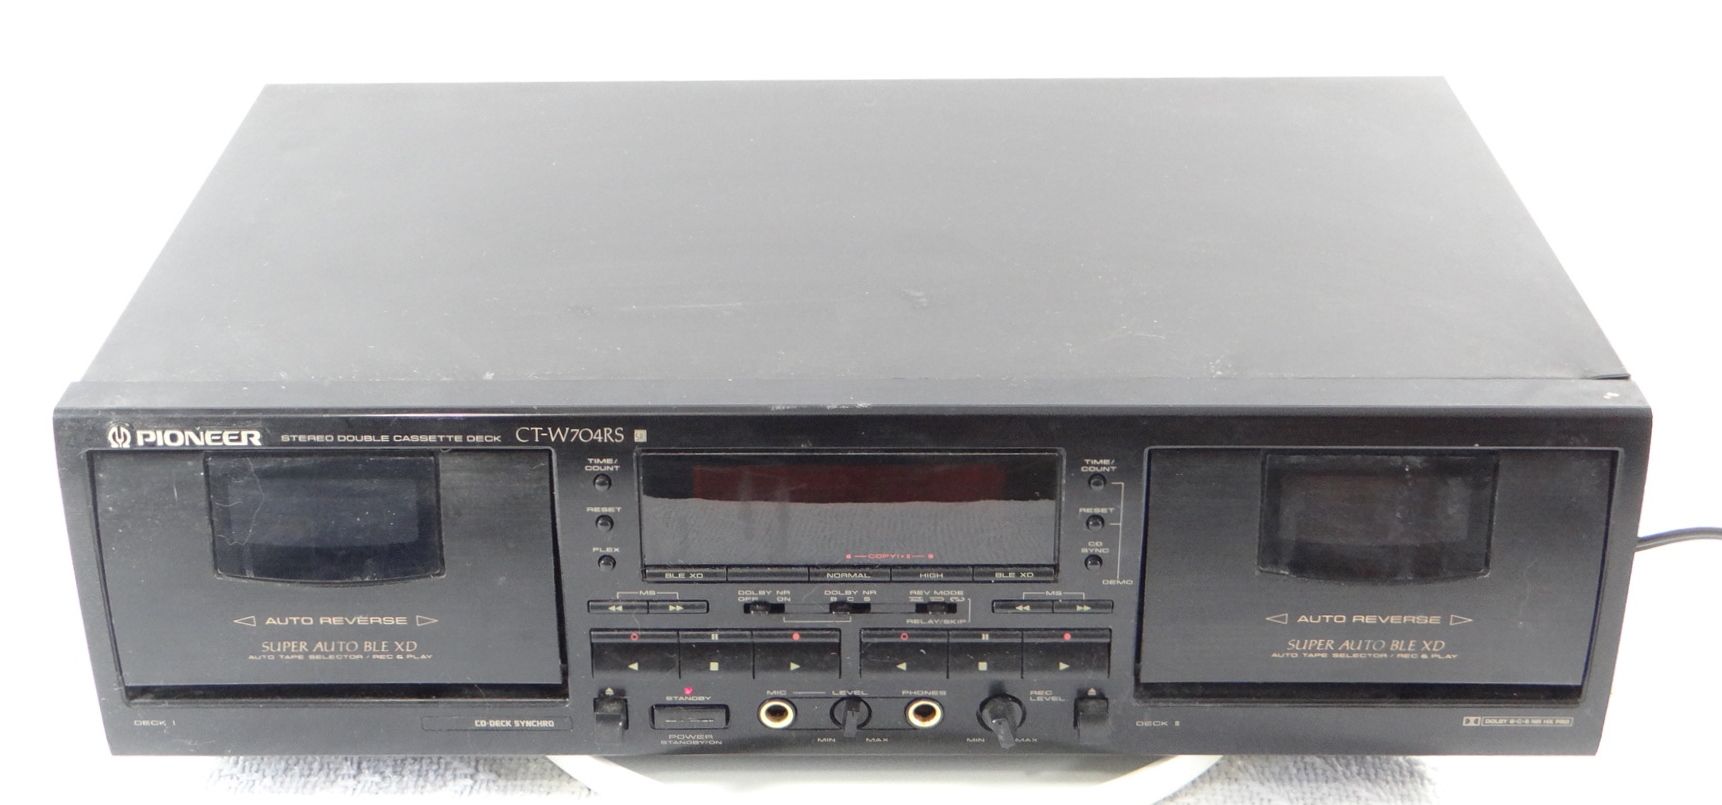 Pioneer Ct-w704rs  -  5